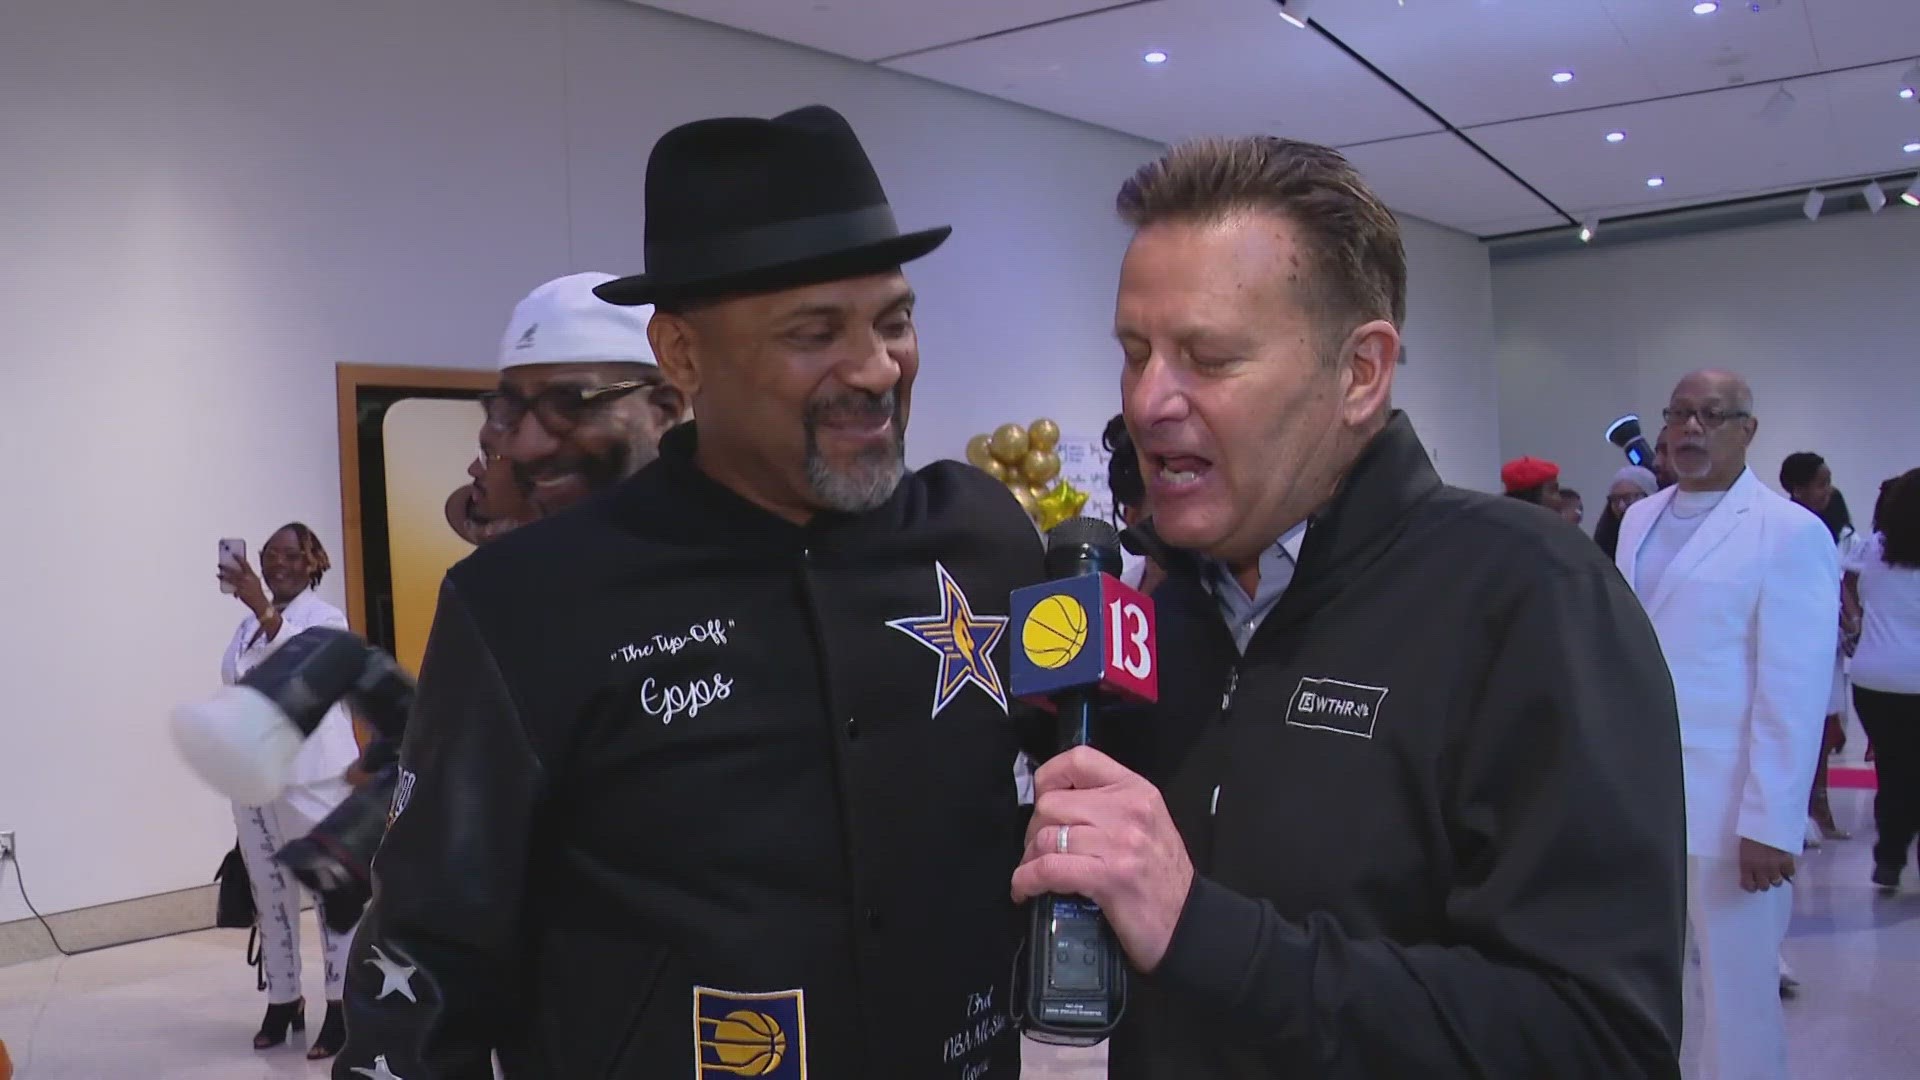 13Sports director Dave Calabro chats with comedian Mike Epps.